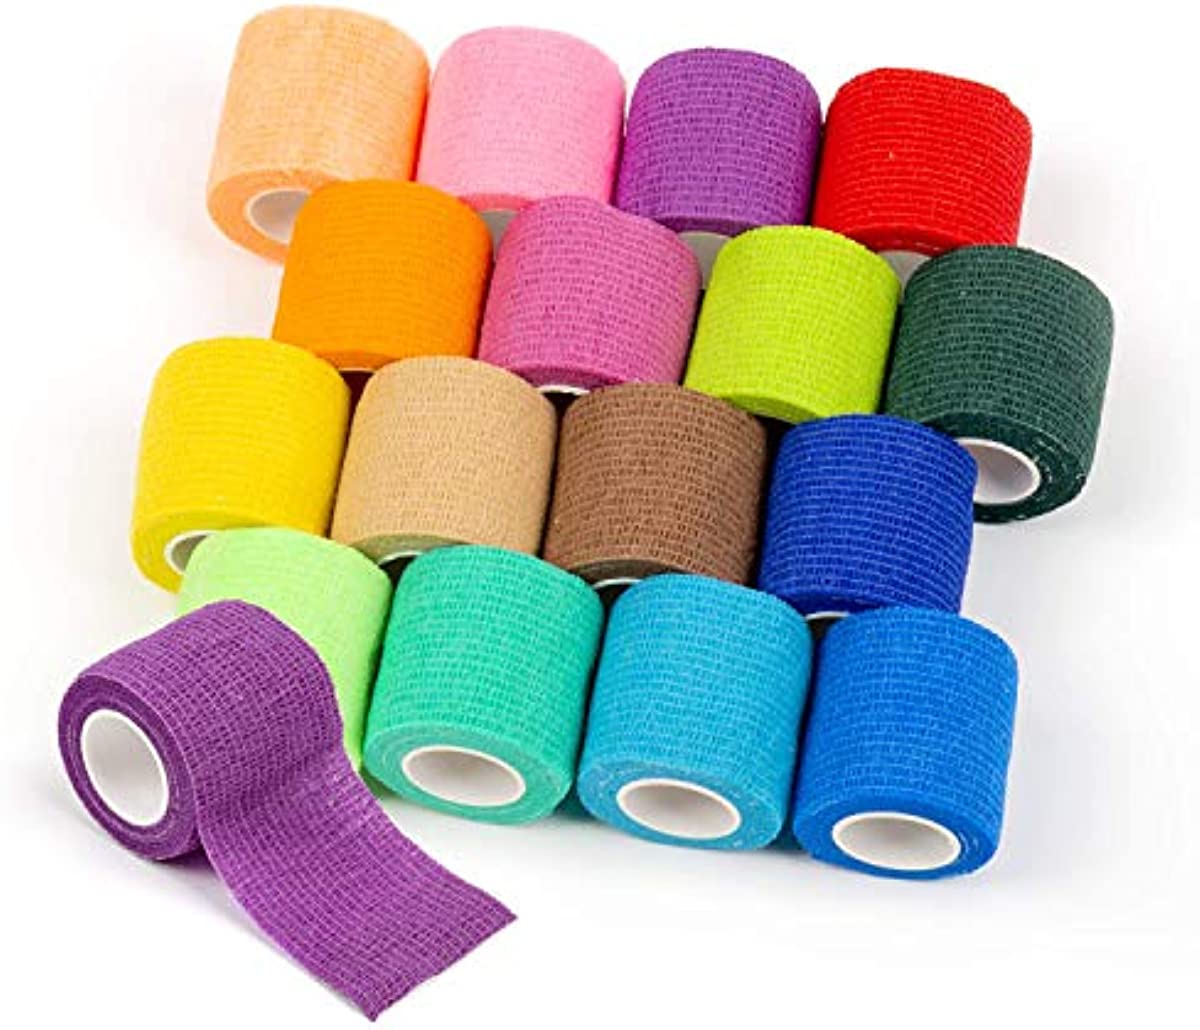 16Pcs Disposable Cohesive Tattoo Grip Cover Wrap, Self Grip Roll Elastic Bandage Handle Grip Tube